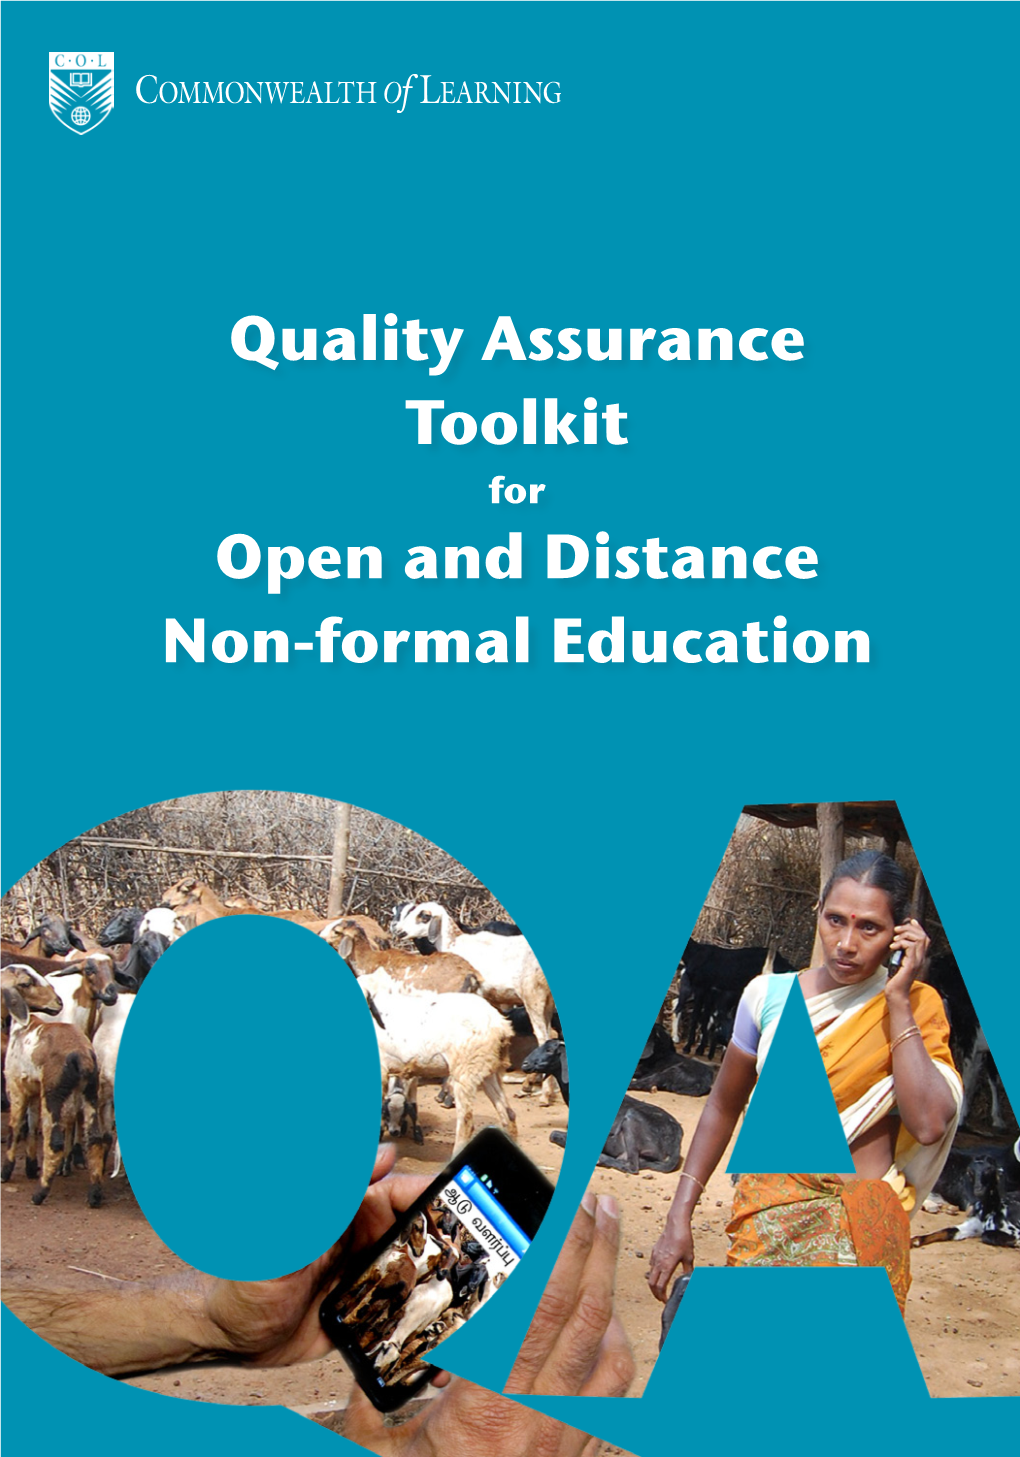 Quality Assurance Toolkit for Open and Distance Non-Formal Education